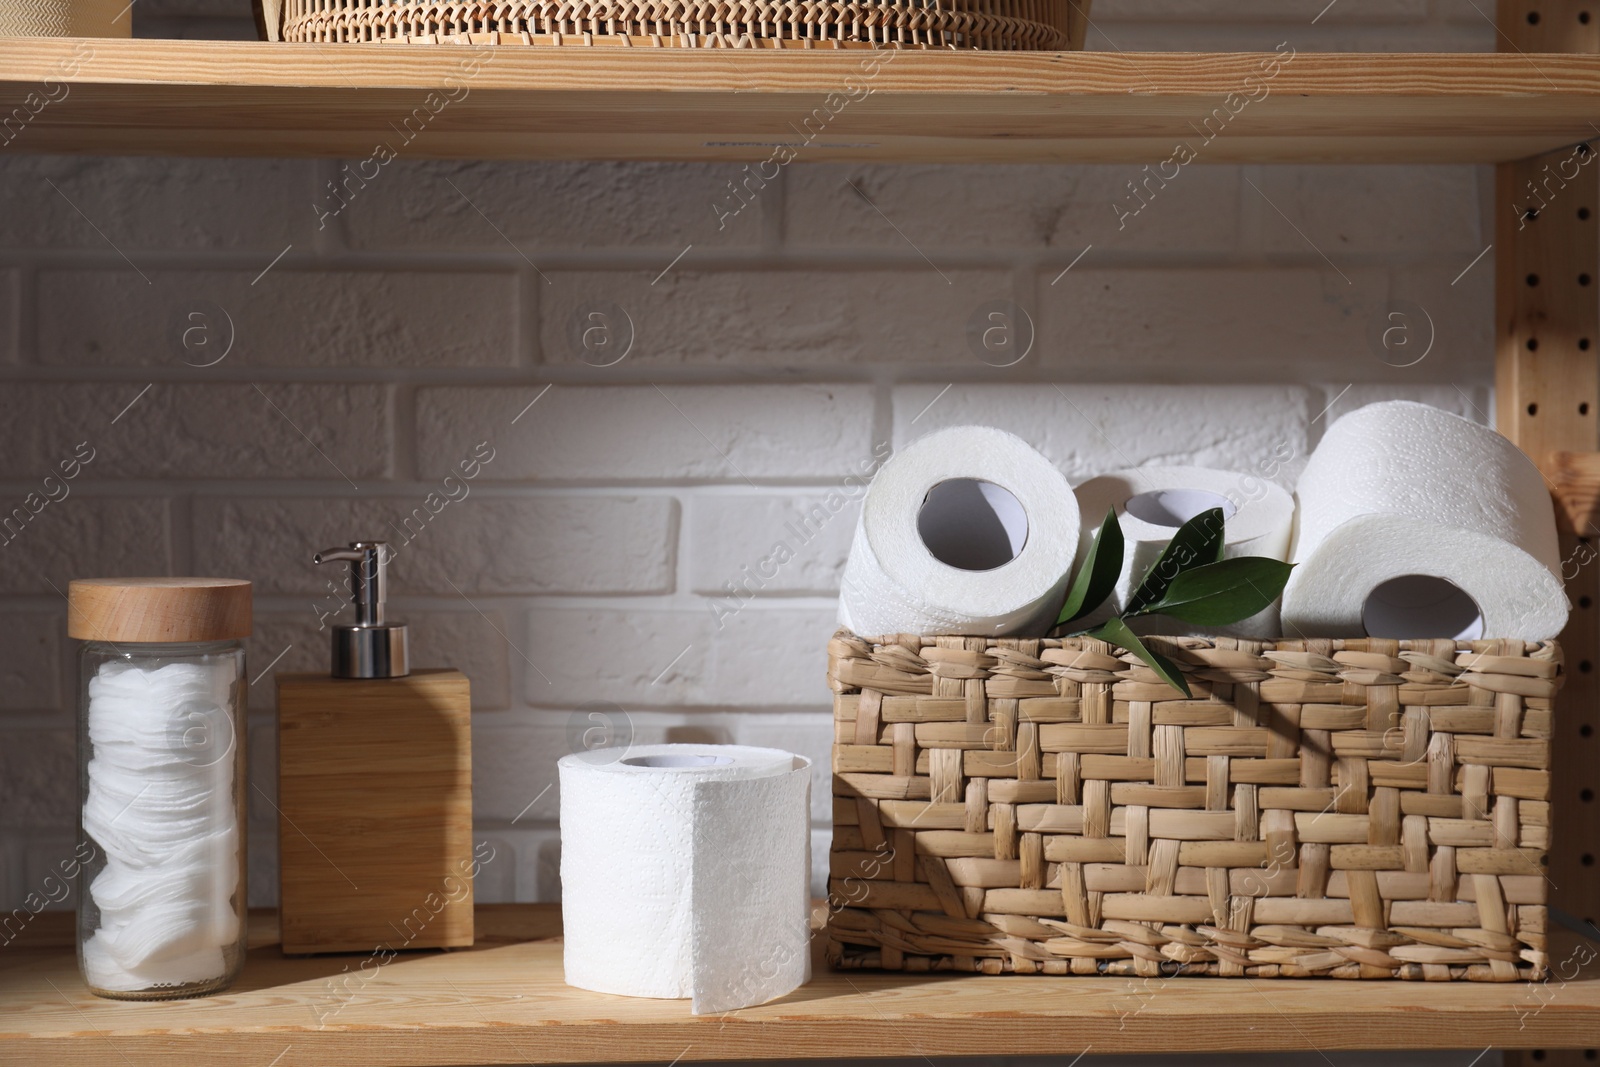 Photo of Toilet paper rolls in wicker basket, green leaves, cotton pads and dispenser on wooden shelf against white brick wall